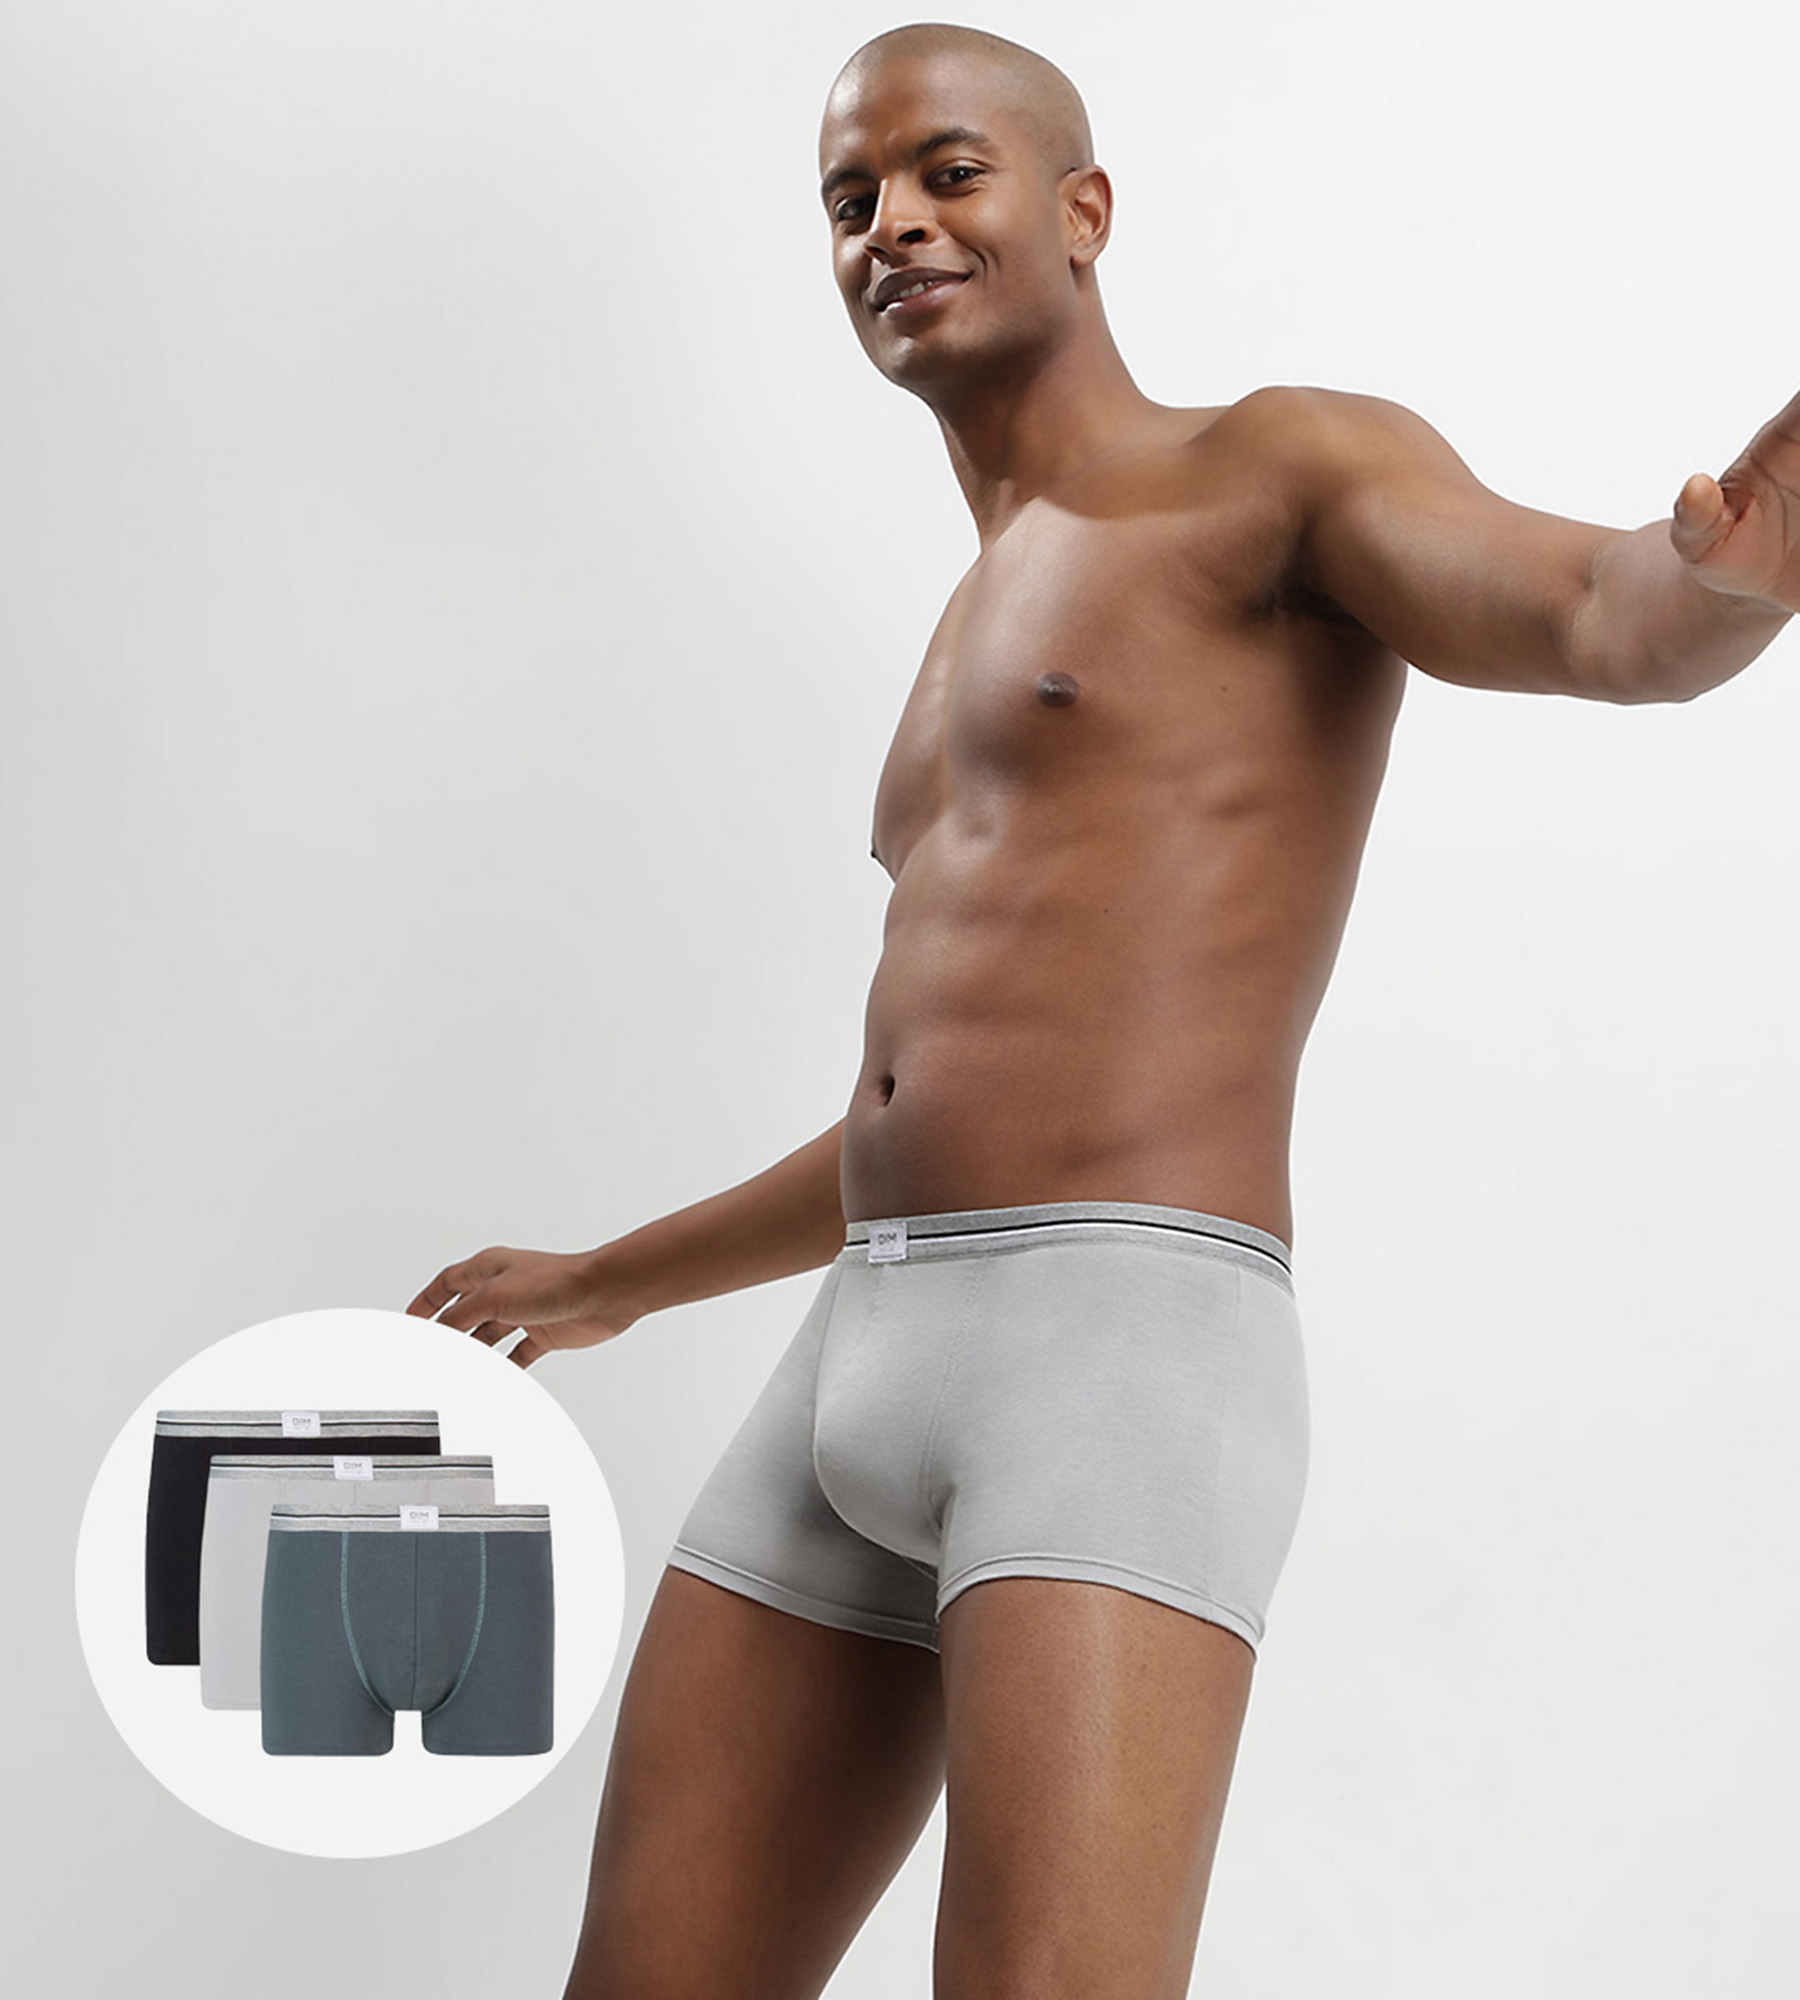 Pack of 3 pairs of Coton Stretch grey, chilli red and black briefs